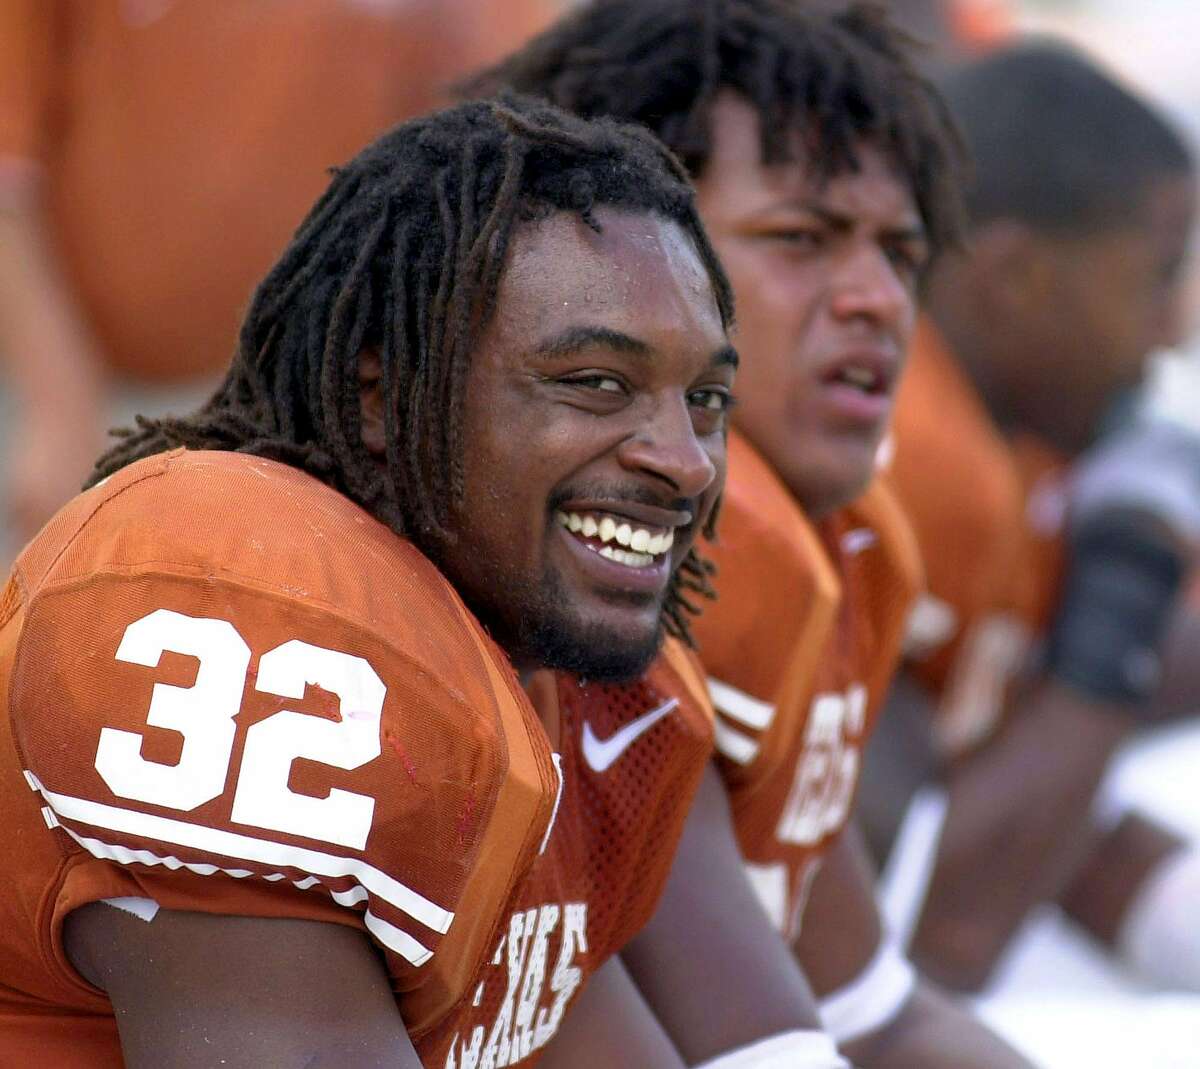 Texas' Cedric Benson (32) is all smiles as he sits on the bench after scoring a touchdown against Nebraksa Saturday Nov 1, 2003 at Texas Memorial Stadium in Austin,Tx. Texas went on to defeat Nebraska 31-7. PHOTO BY EDWARD A. ORNELAS/STAFF